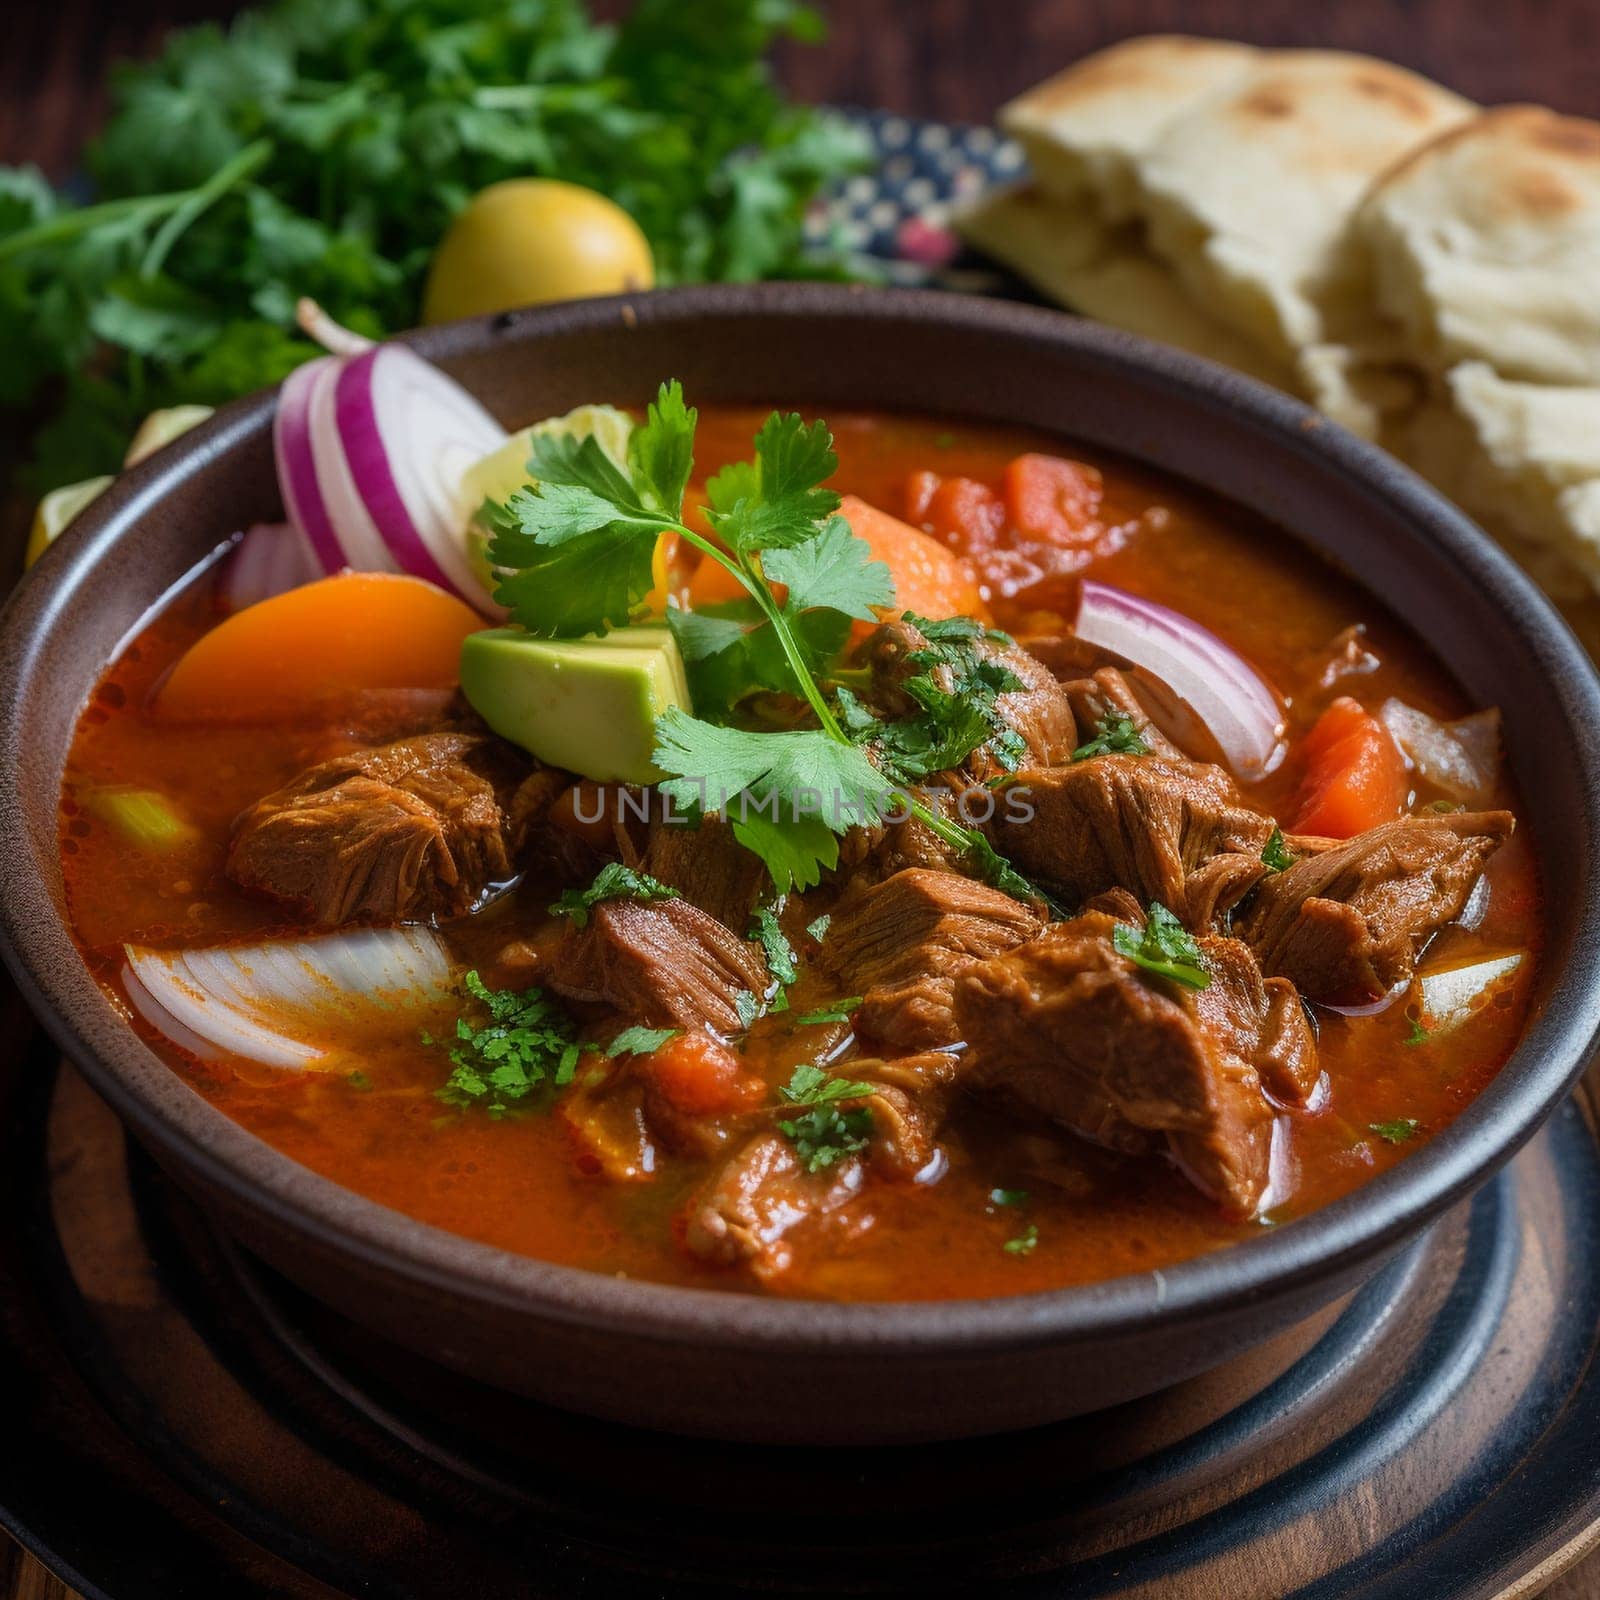 This close-up shot captures the rich and aromatic flavors of Guatemalan Pepian, a meat stew made with tender and flavorful pieces of chicken or beef. The stew is cooked in a sauce made with tomatoes, chilies, and spices such as cumin, coriander, and cinnamon. In this image, the Pepian is served with a side of rice and a simple salad of lettuce and tomatoes. The cozy and inviting outdoor scene in the background adds to the comforting atmosphere, with warm colors and soft lighting enhancing the mood. The warm, diffused lighting and use of a reflector highlight the texture and colors of the food, creating a cozy and comforting mood.